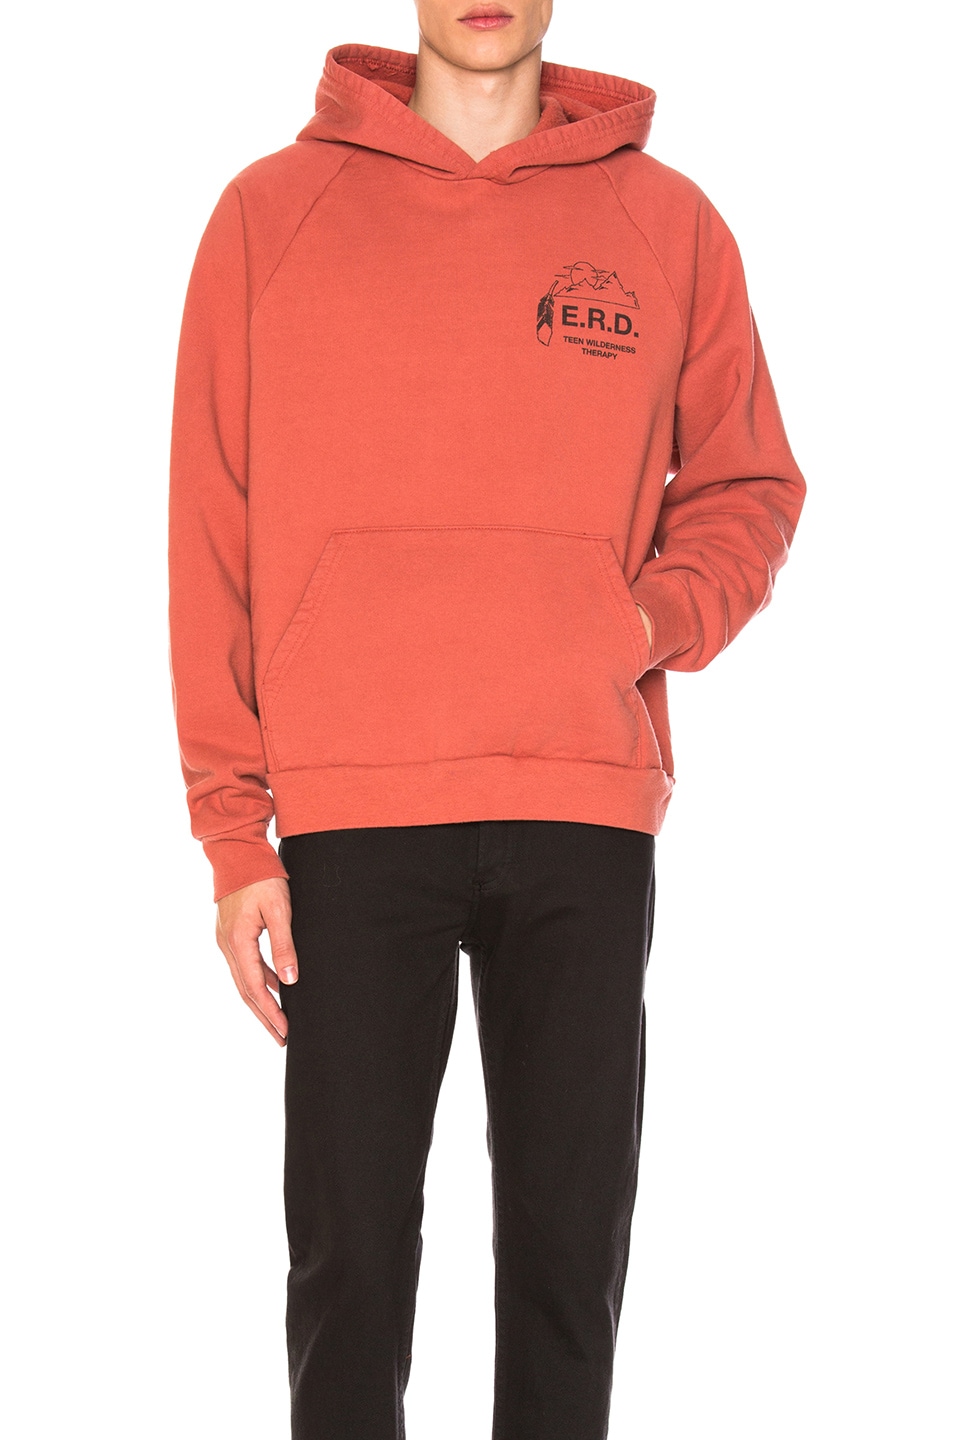 Image 1 of Enfants Riches Deprimes Wilderness Therapy Hoodie in Red in Faded Burgundy